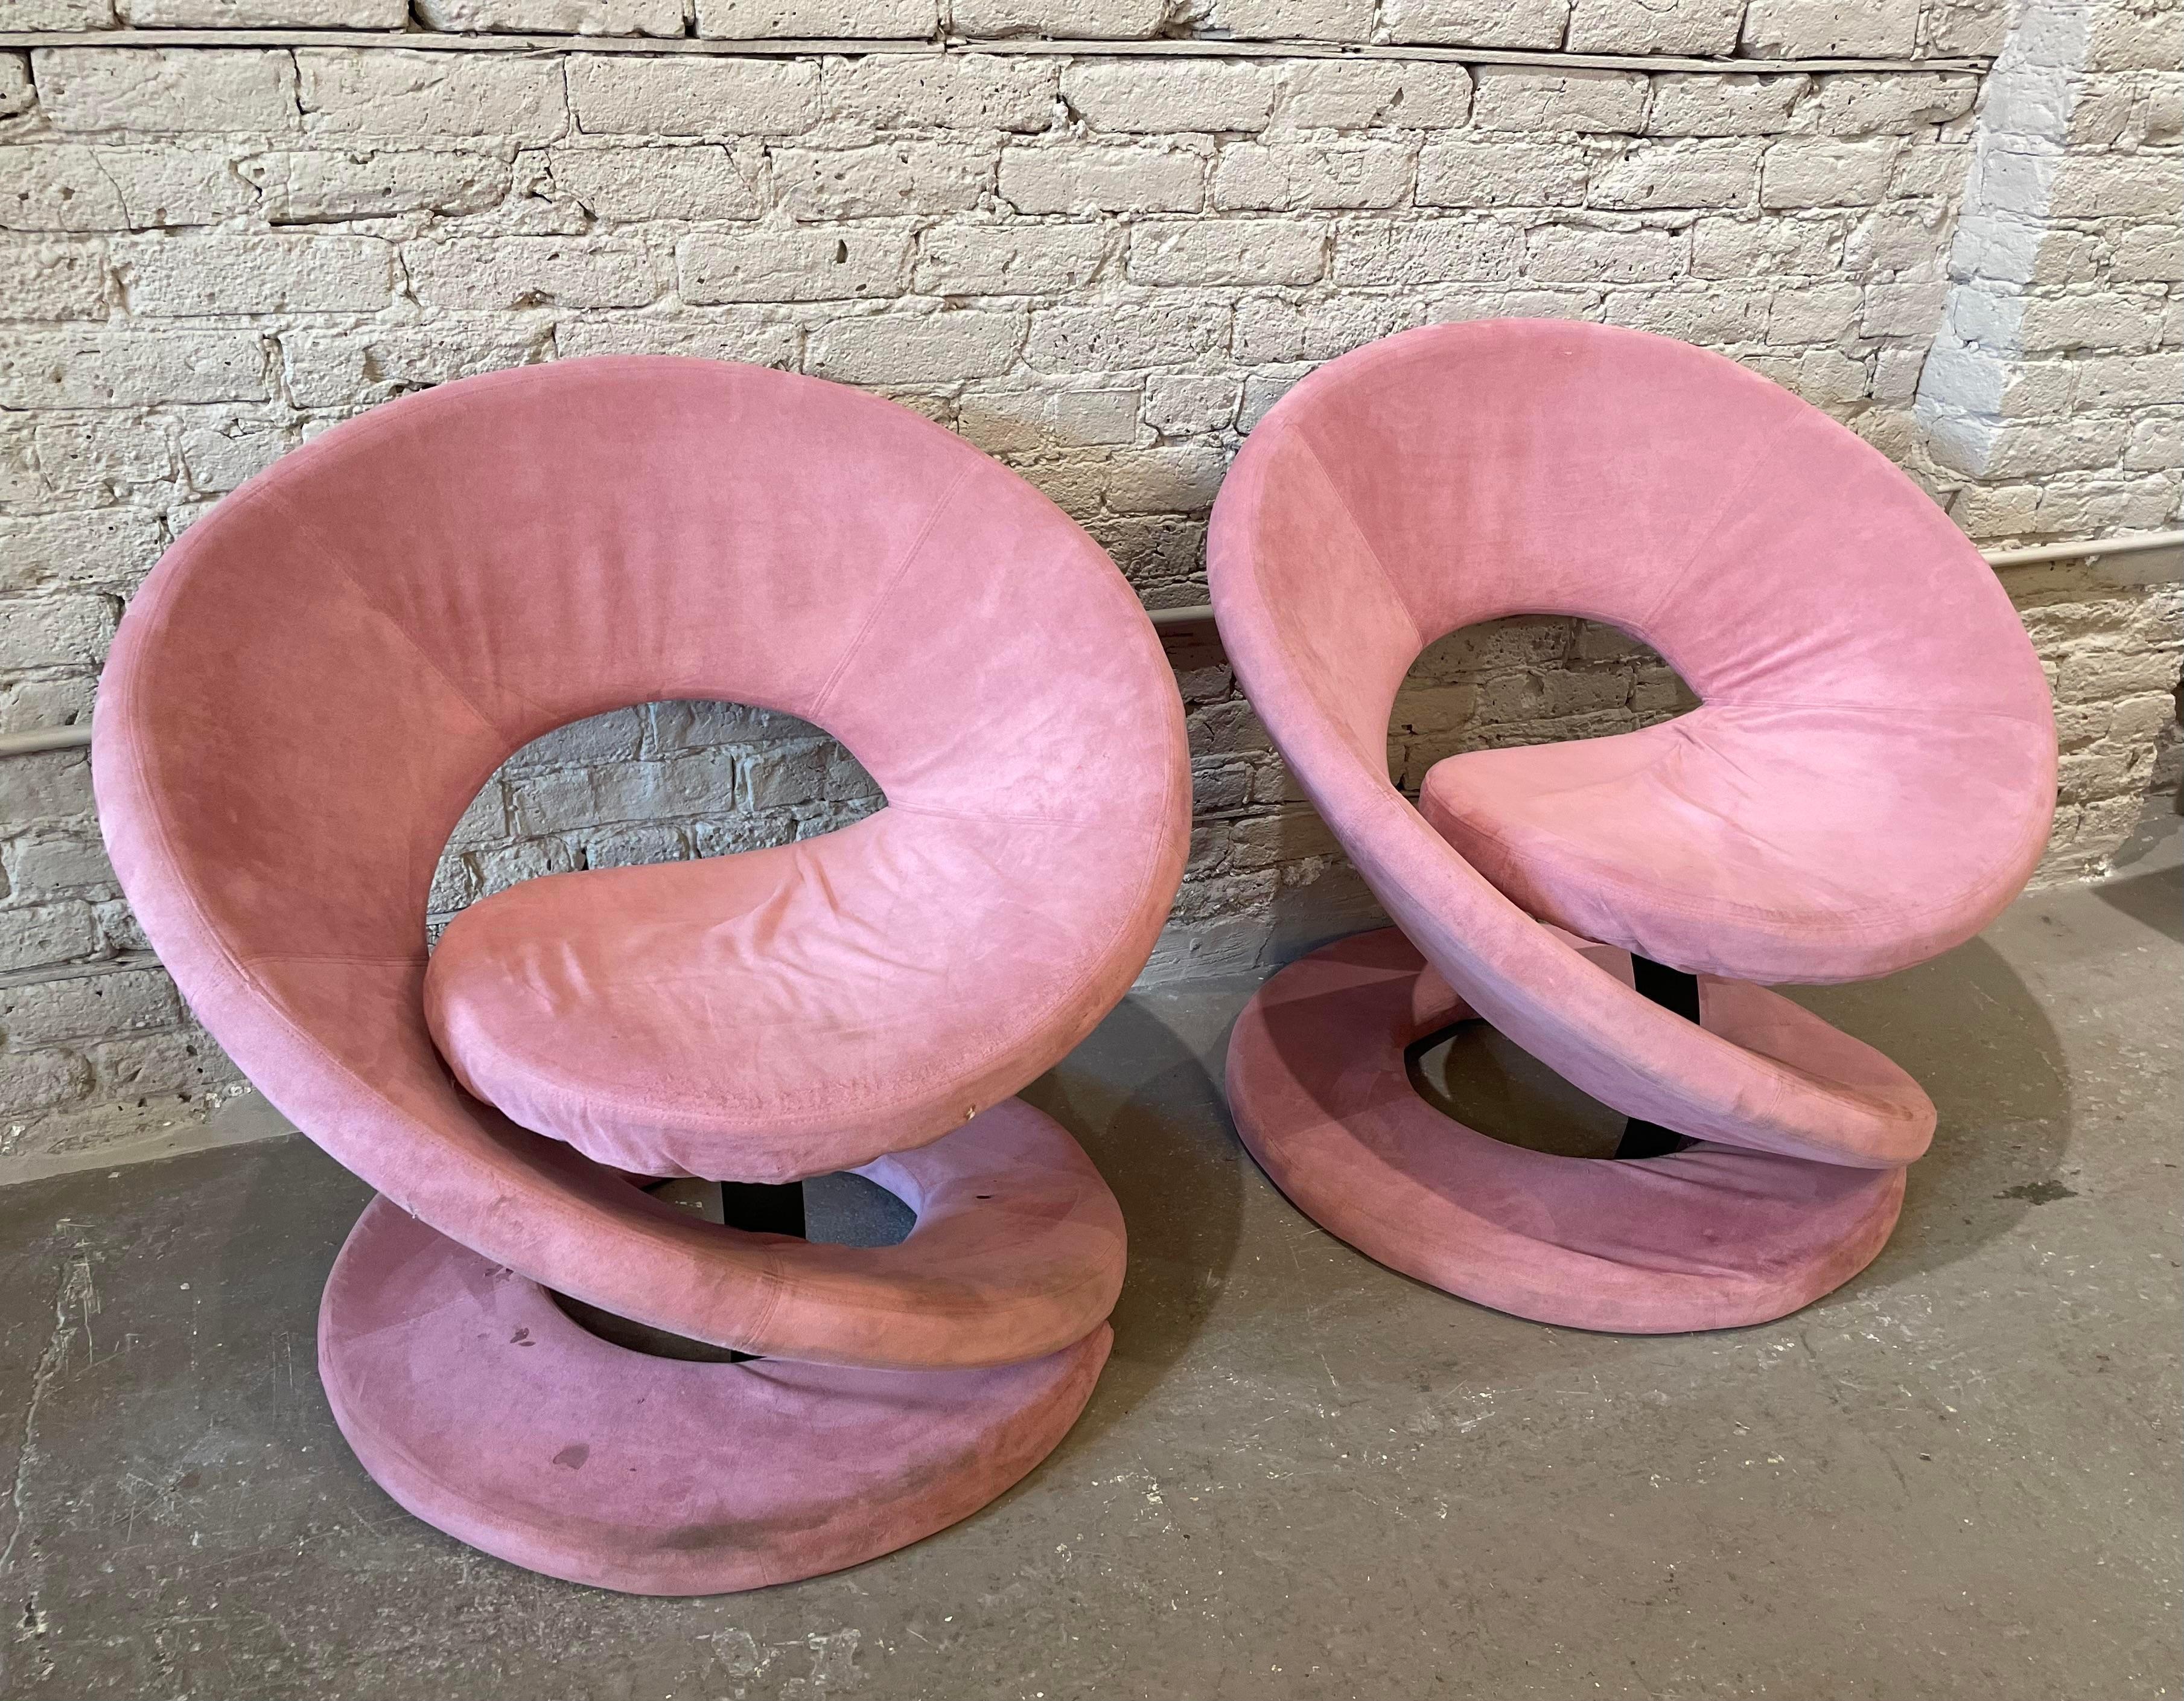 Canadian 1980s Postmodern Corkscrew Chairs Attributed to Quebec 69 Jaymar - a Pair For Sale